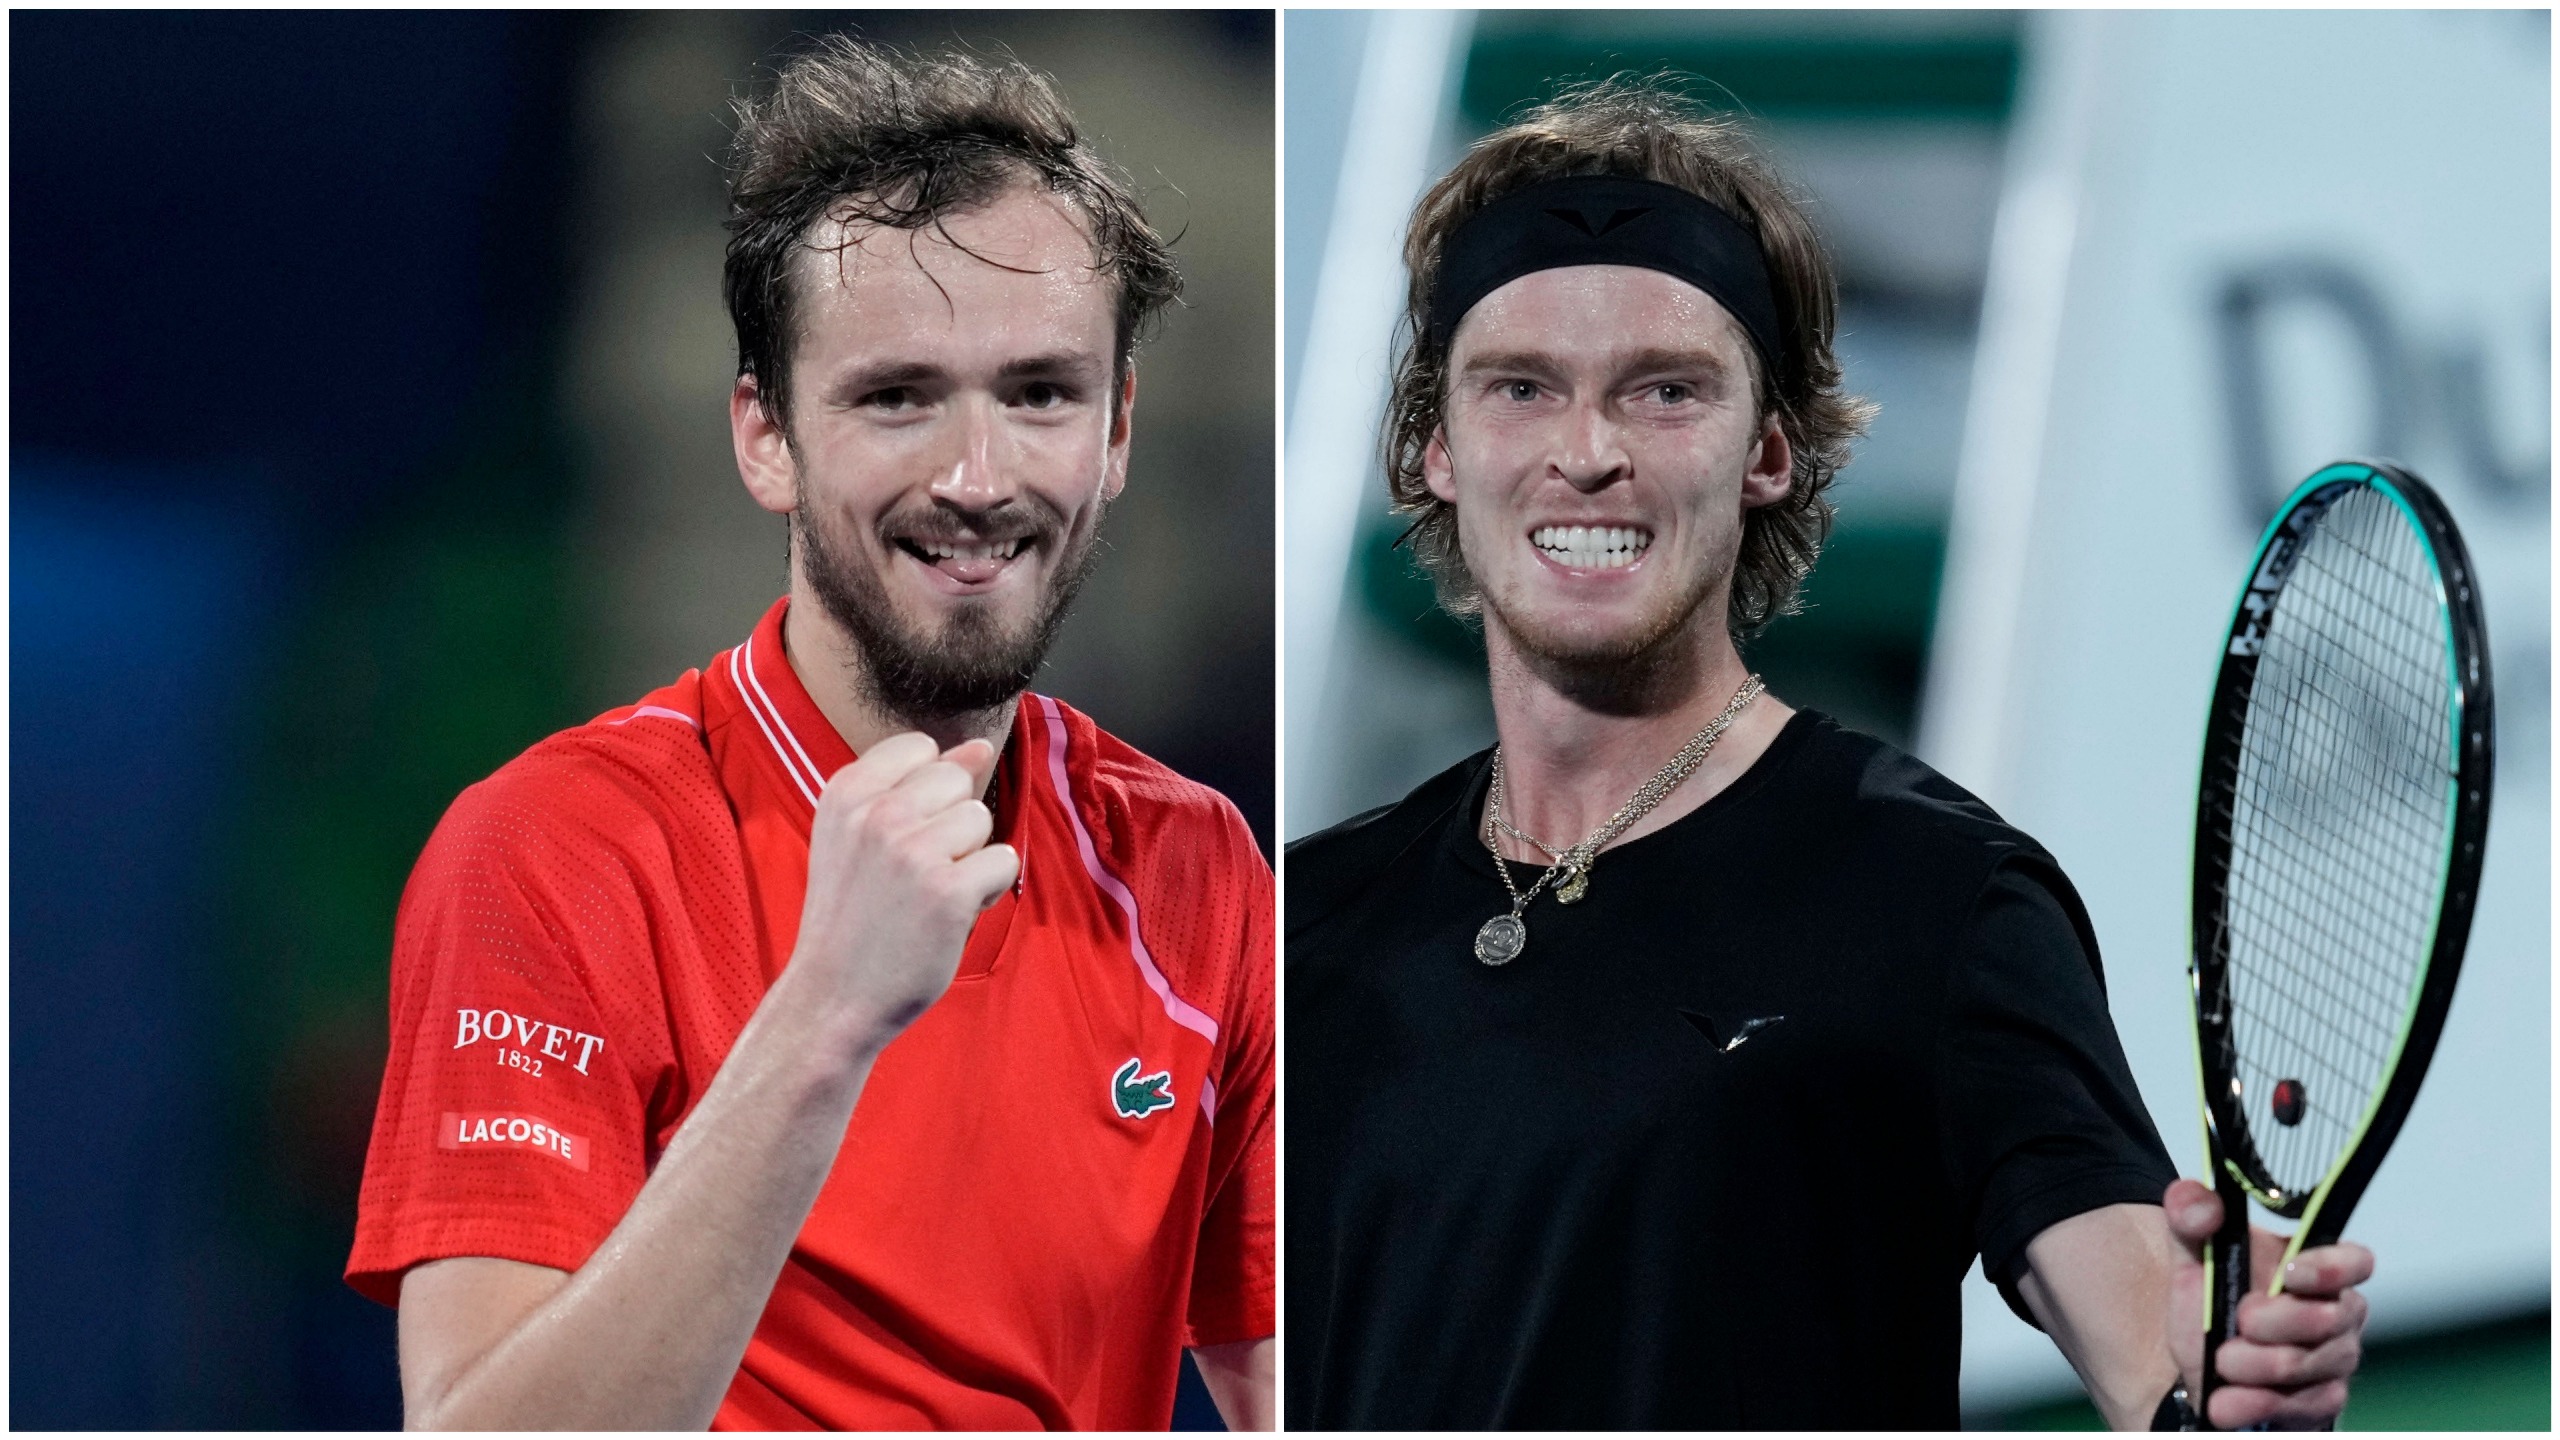 After a year without a nation to play for, Daniil Medvedev and Andrey Rublev will share Dubai final together